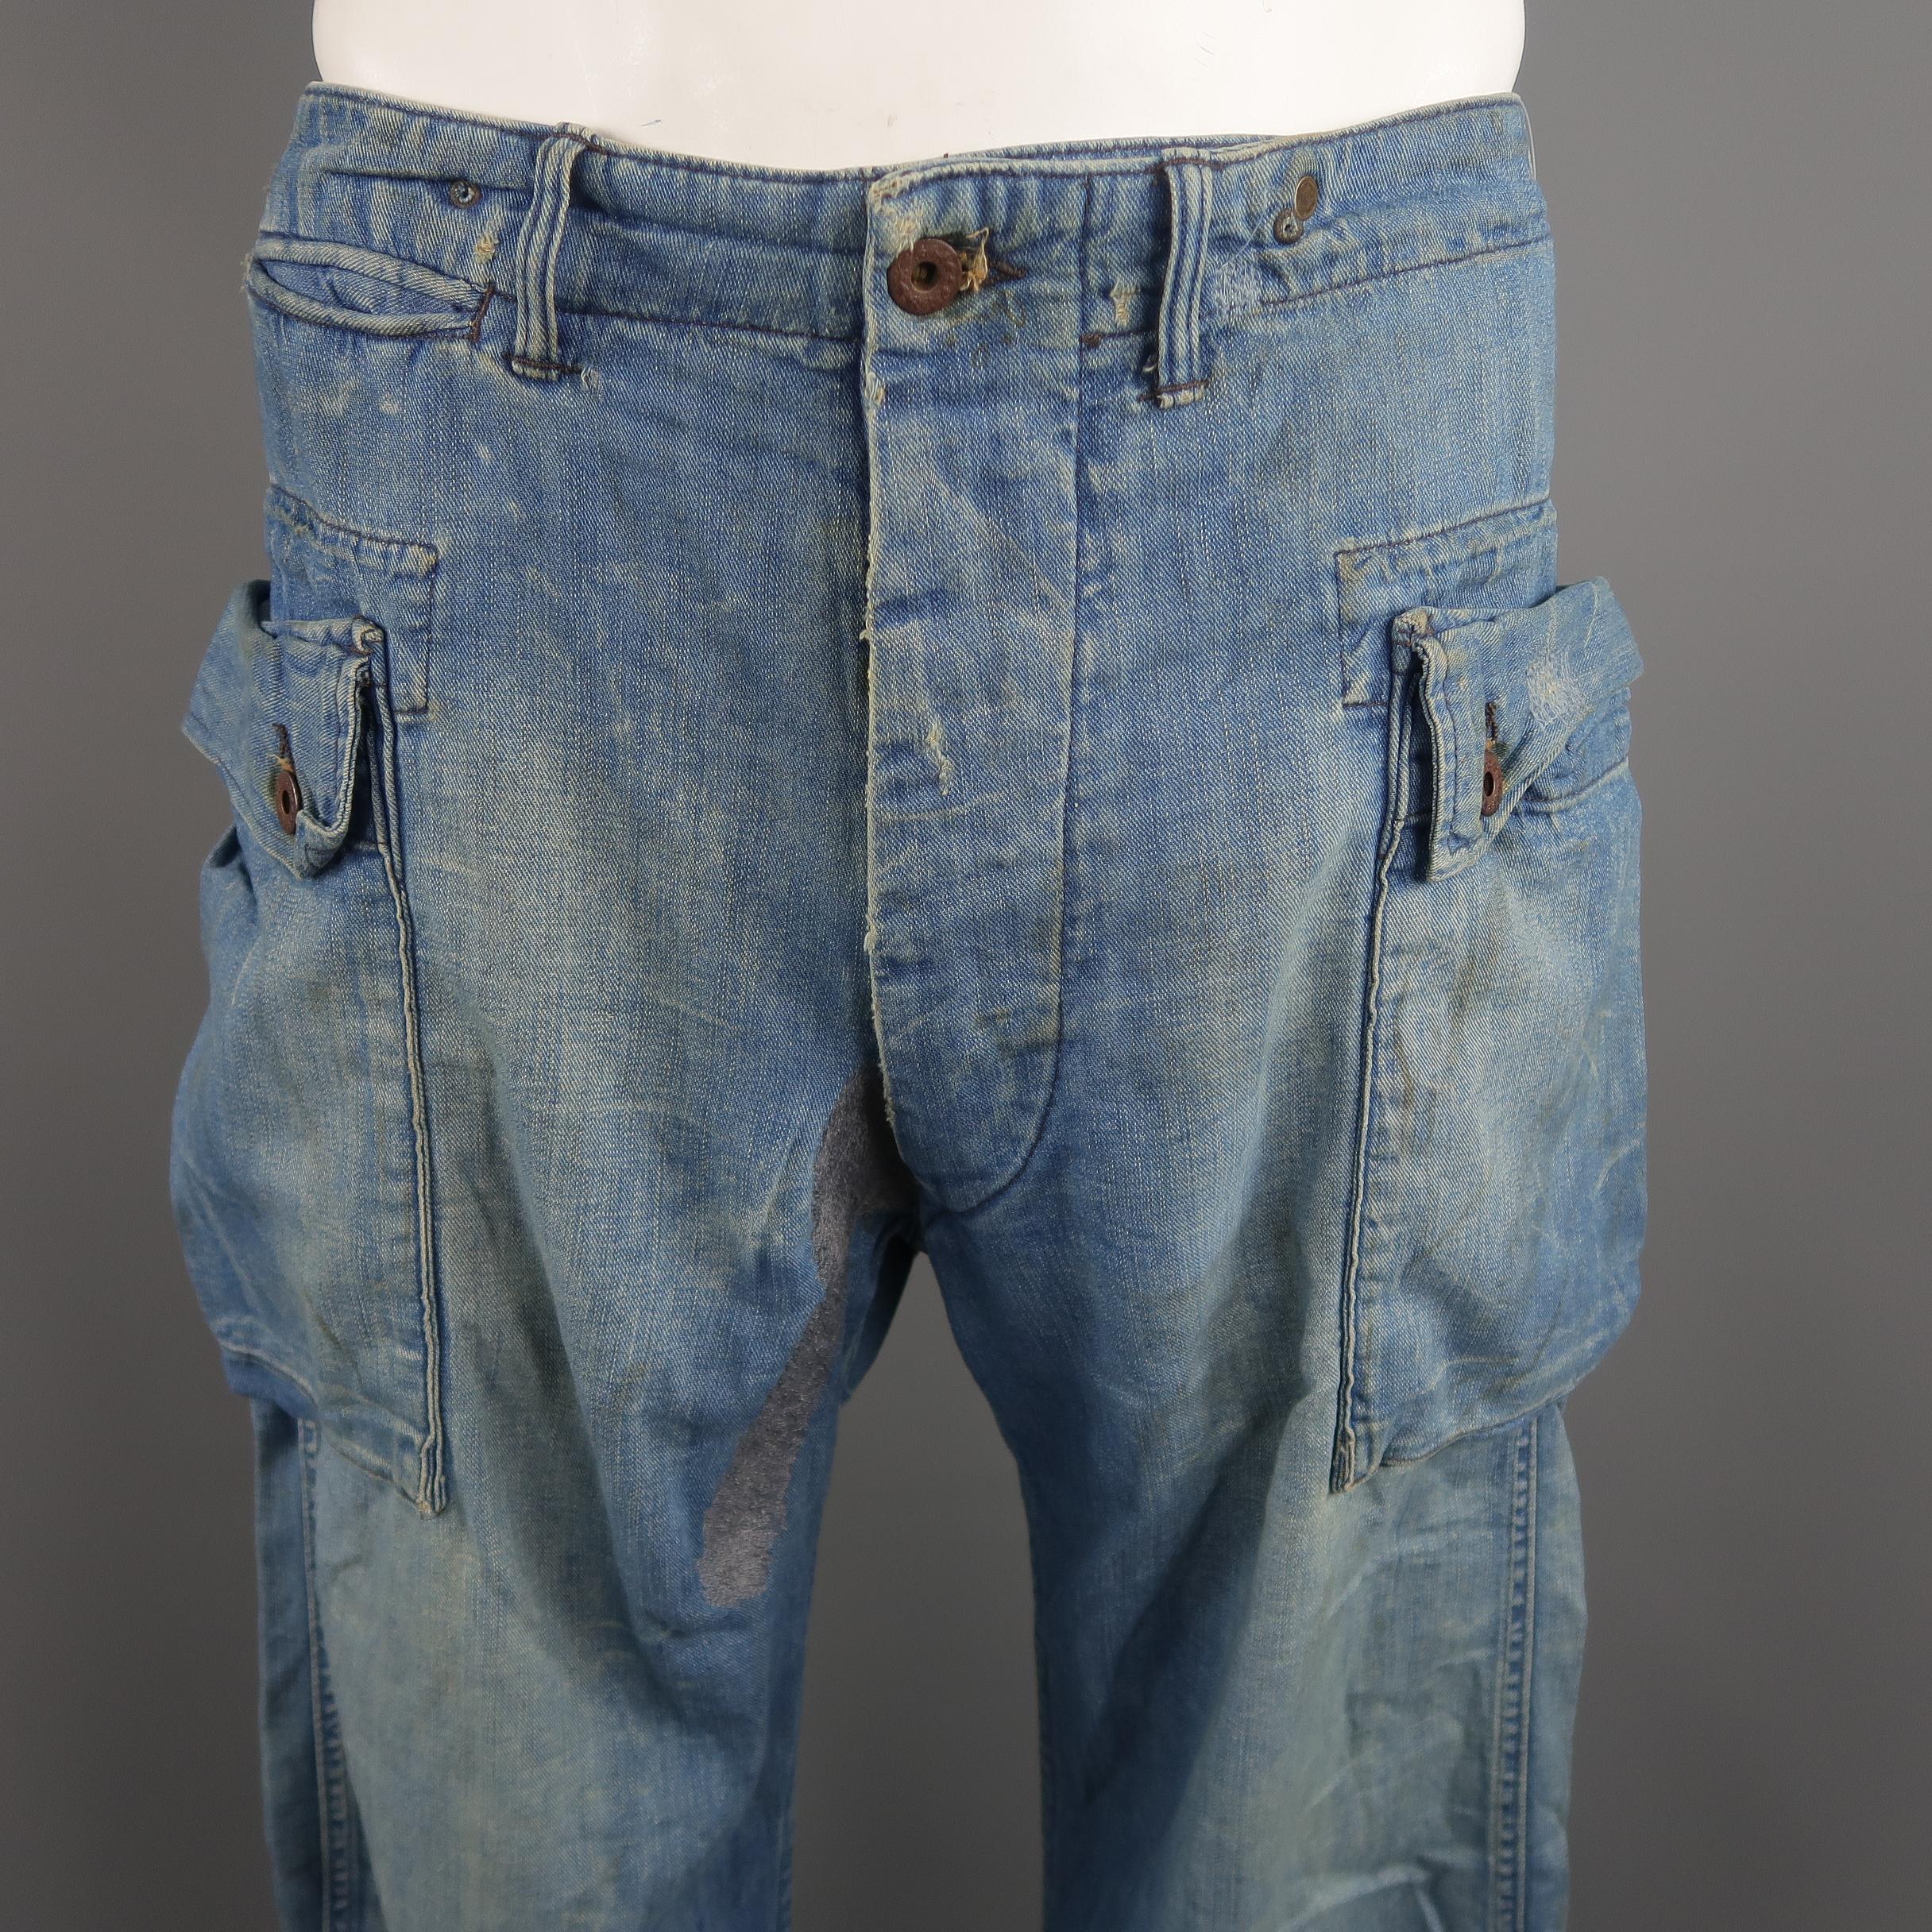 RRL by Ralph Lauren pants come in washed and distressed medium wash denim with a button fly, oversized cargo pockets, and reconstructed stitch embroidery details. Made in USA.
 
Good Pre-Owned Condition.
Marked: 33 x 32
 
Measurements:
 
Waist: 36